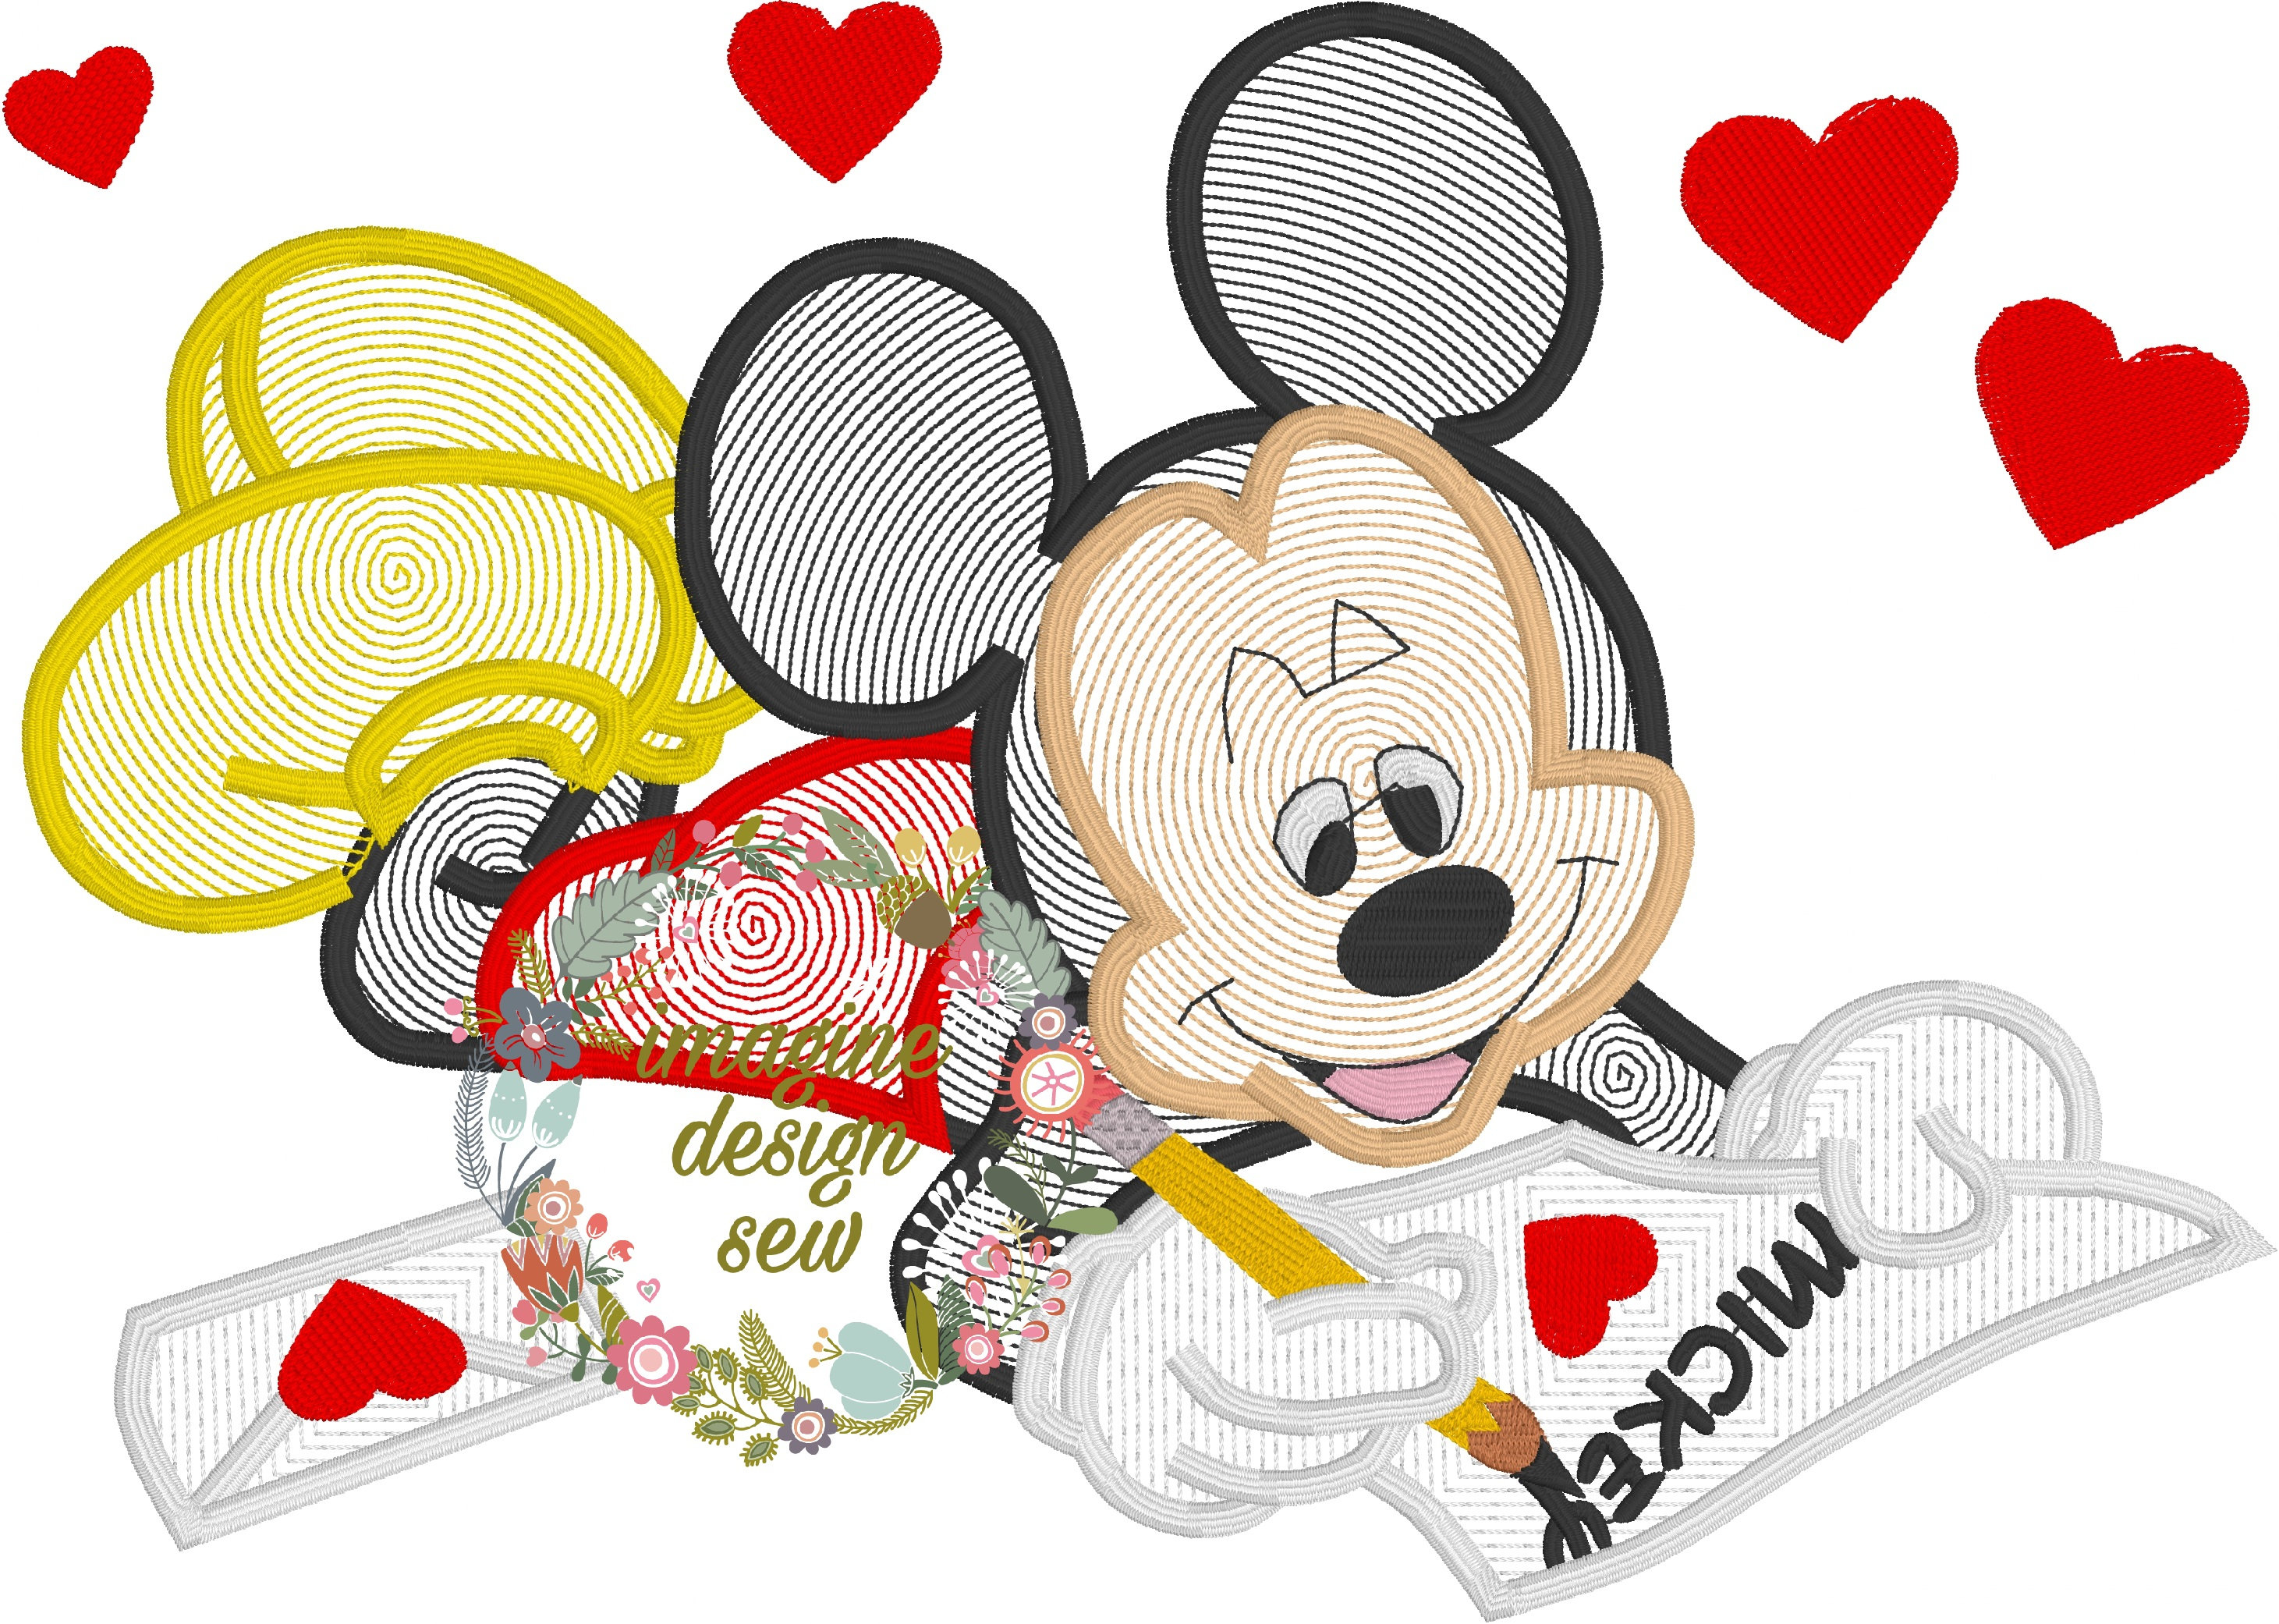 Sewing Machine Embroidery Patterns Valentine Day Love Mr Mouse Run Fill Stitch Machine Embroidery Design Instant Download 5x7 6x10 7x11 Embroidery Pattern